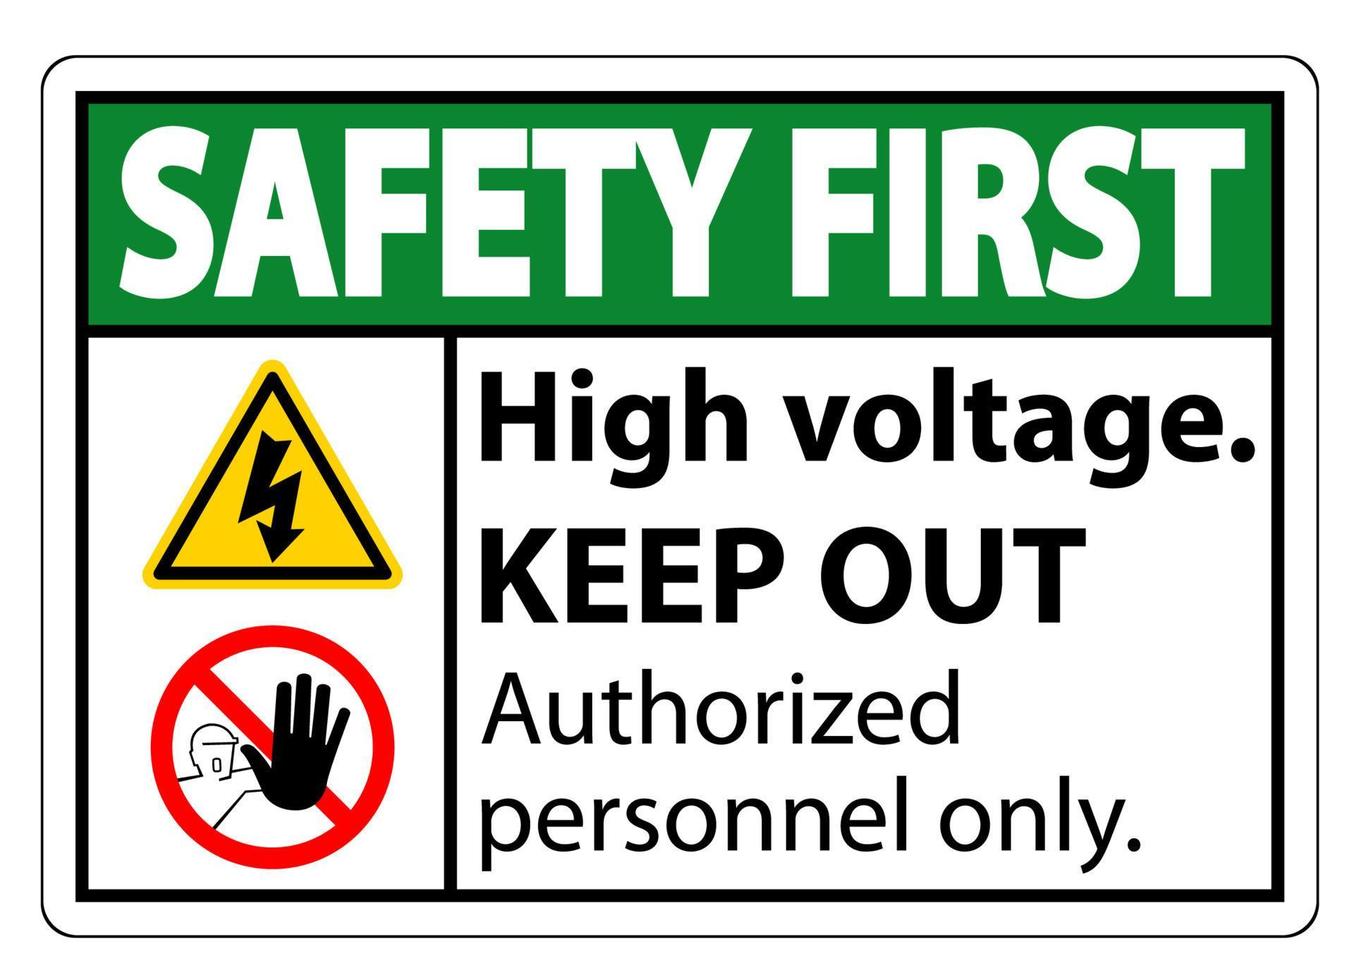 Safety first High Voltage Keep Out Sign Isolate On White Background,Vector Illustration EPS.10 vector